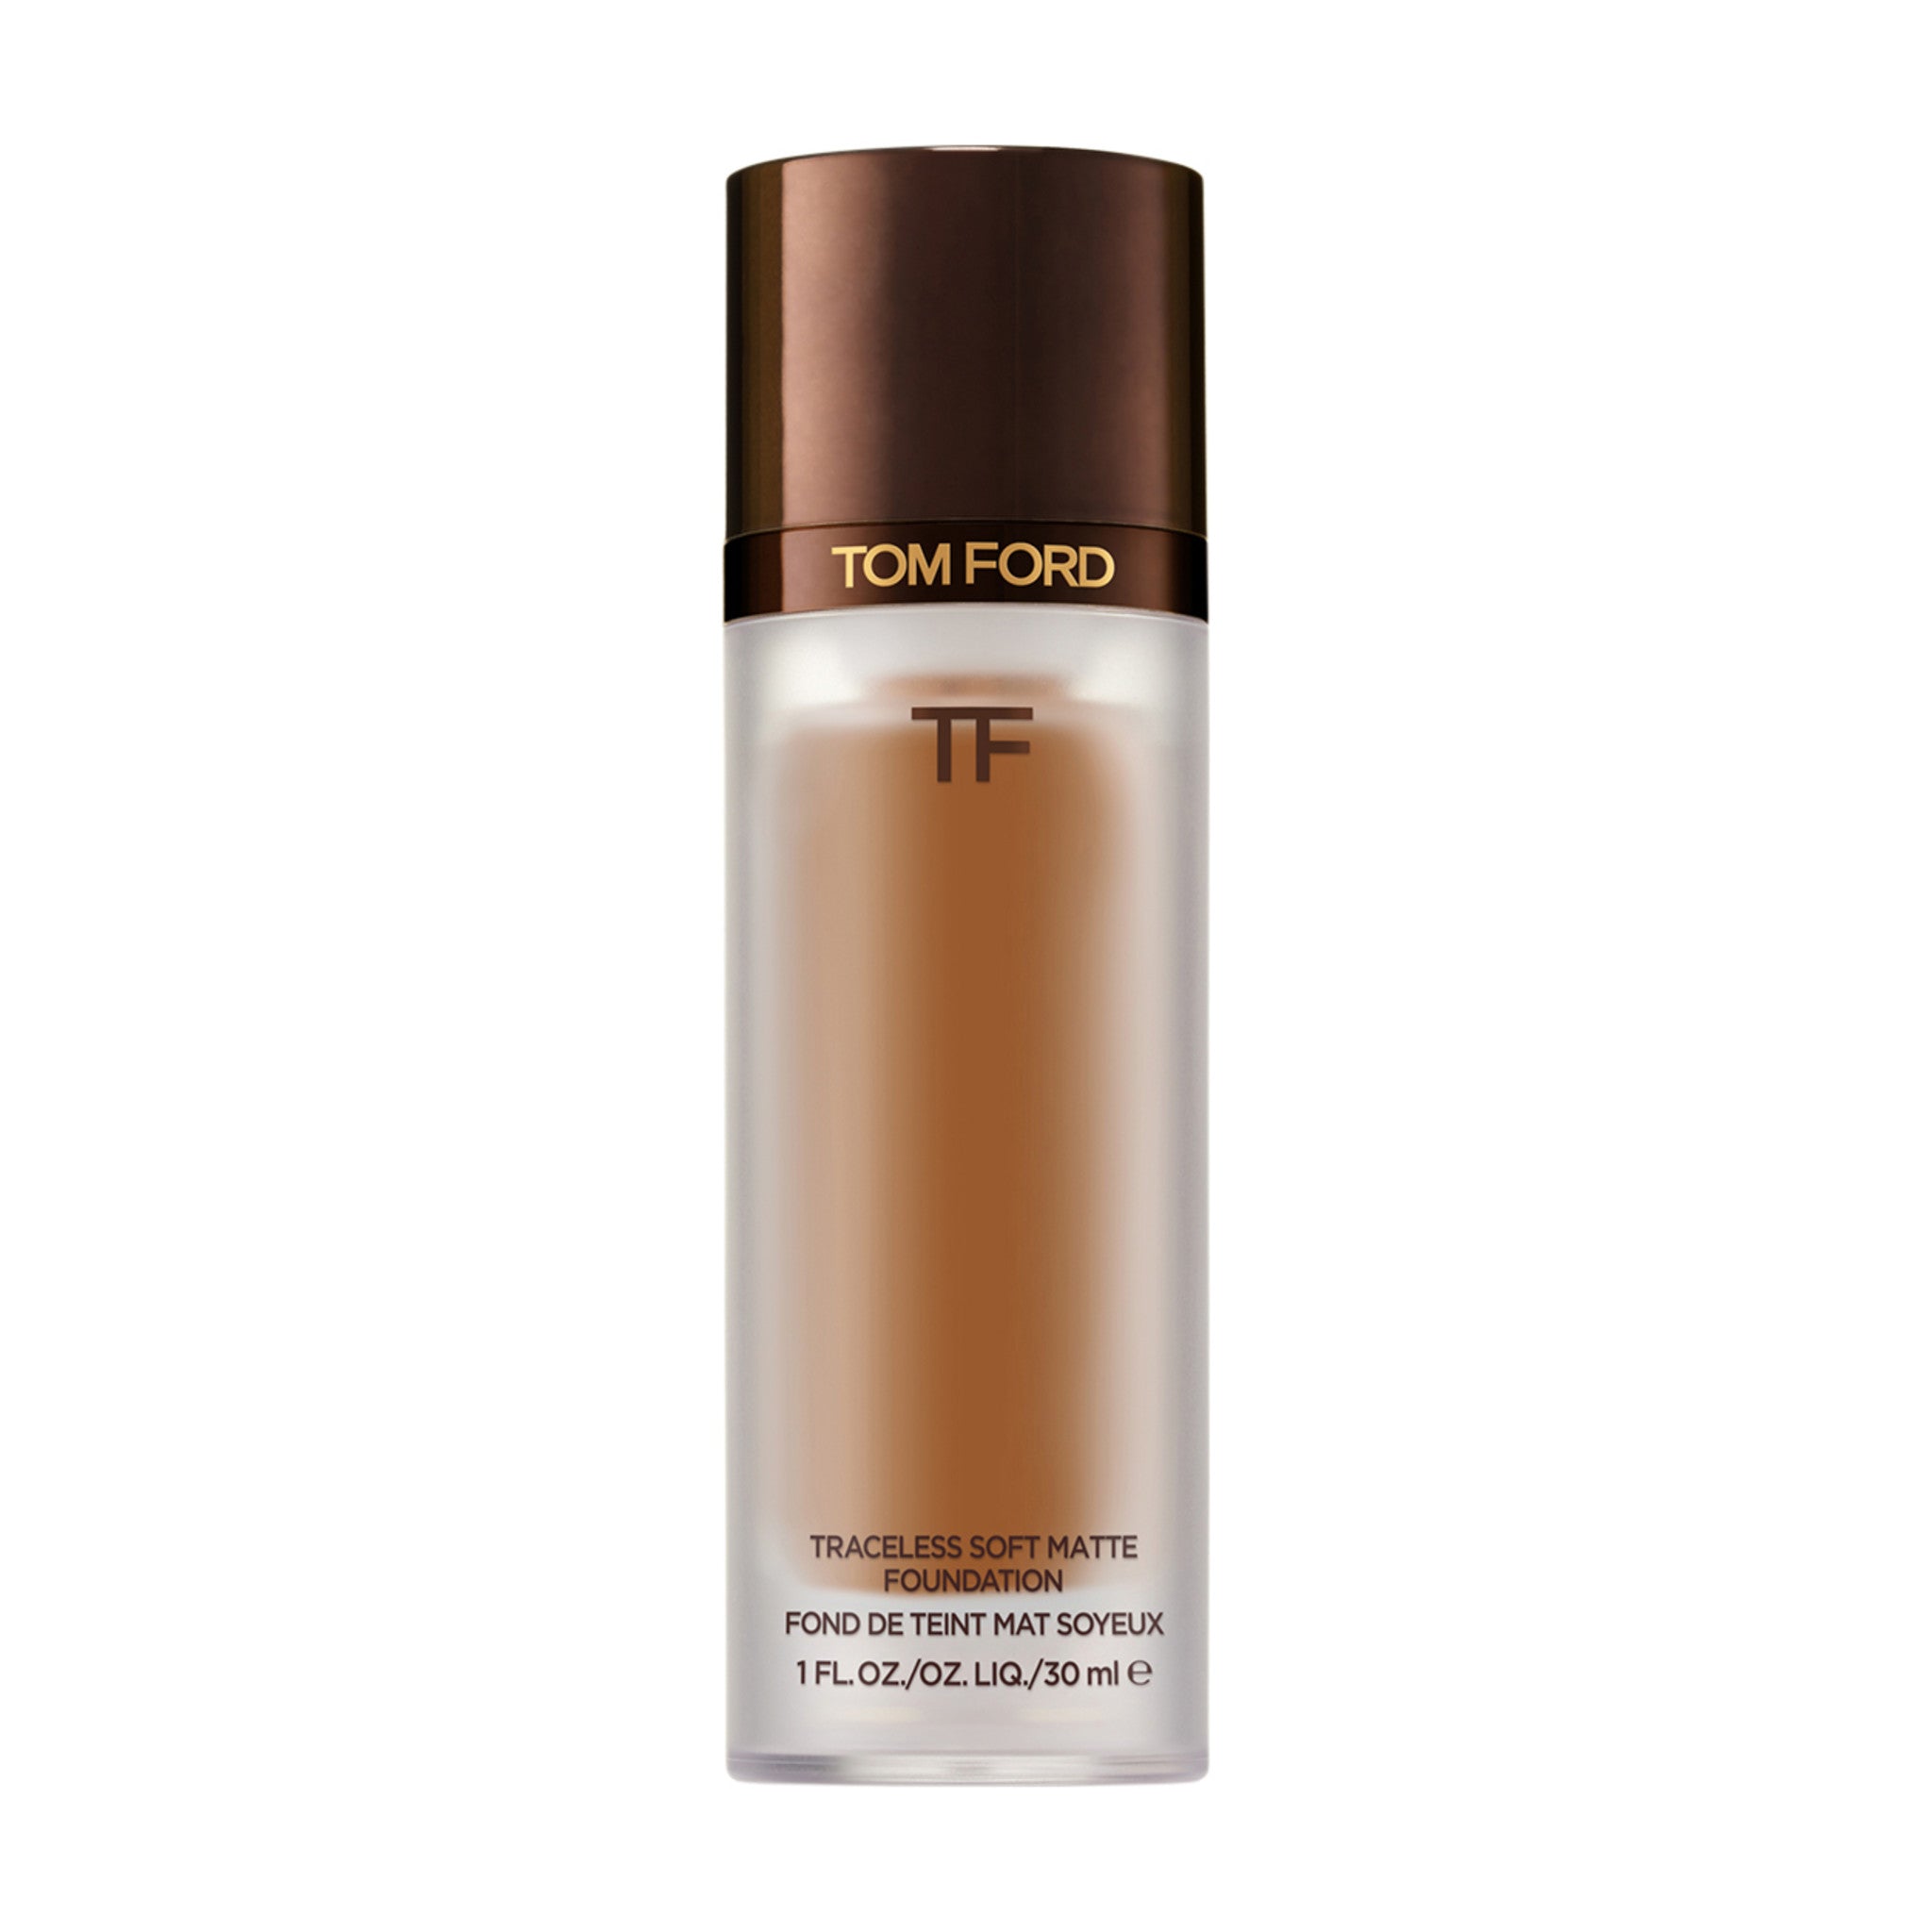 Tom Ford Traceless Soft Matte Foundation Color/Shade variant: 9.7 Cool Dusk (Dark-deep, cool undertone) main image. This product is for deep cool complexions